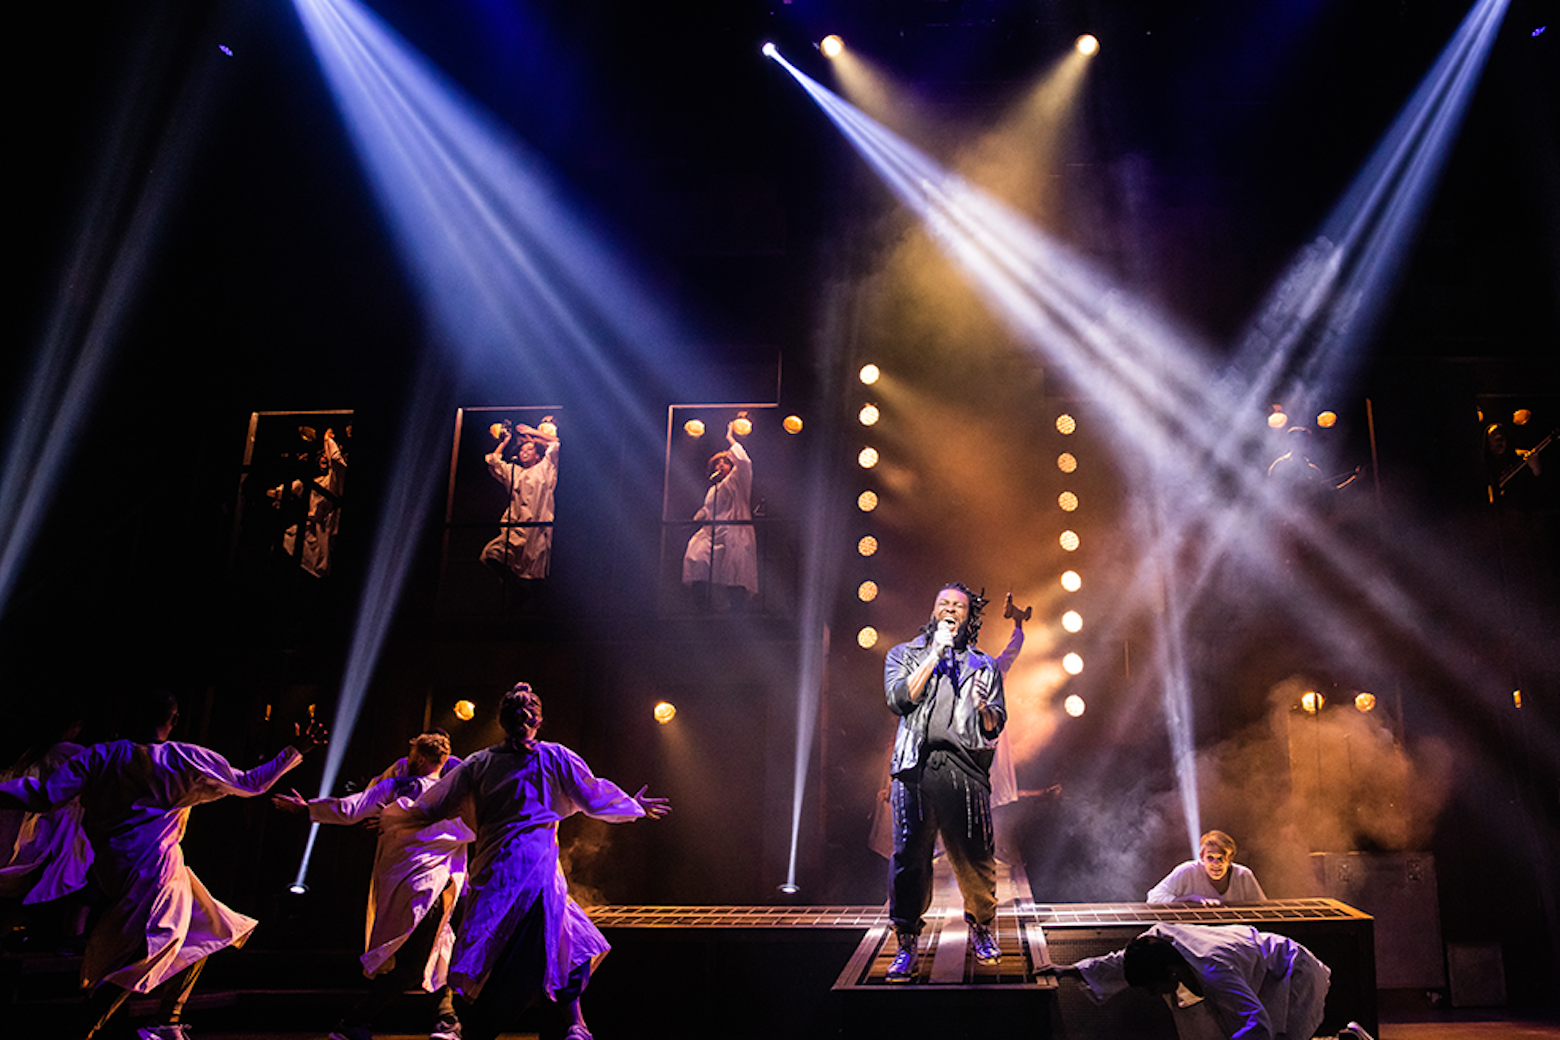 What’s the buzz? ‘Jesus Christ Superstar’ at National Theatre marks homecoming for Virginia native - WTOP News